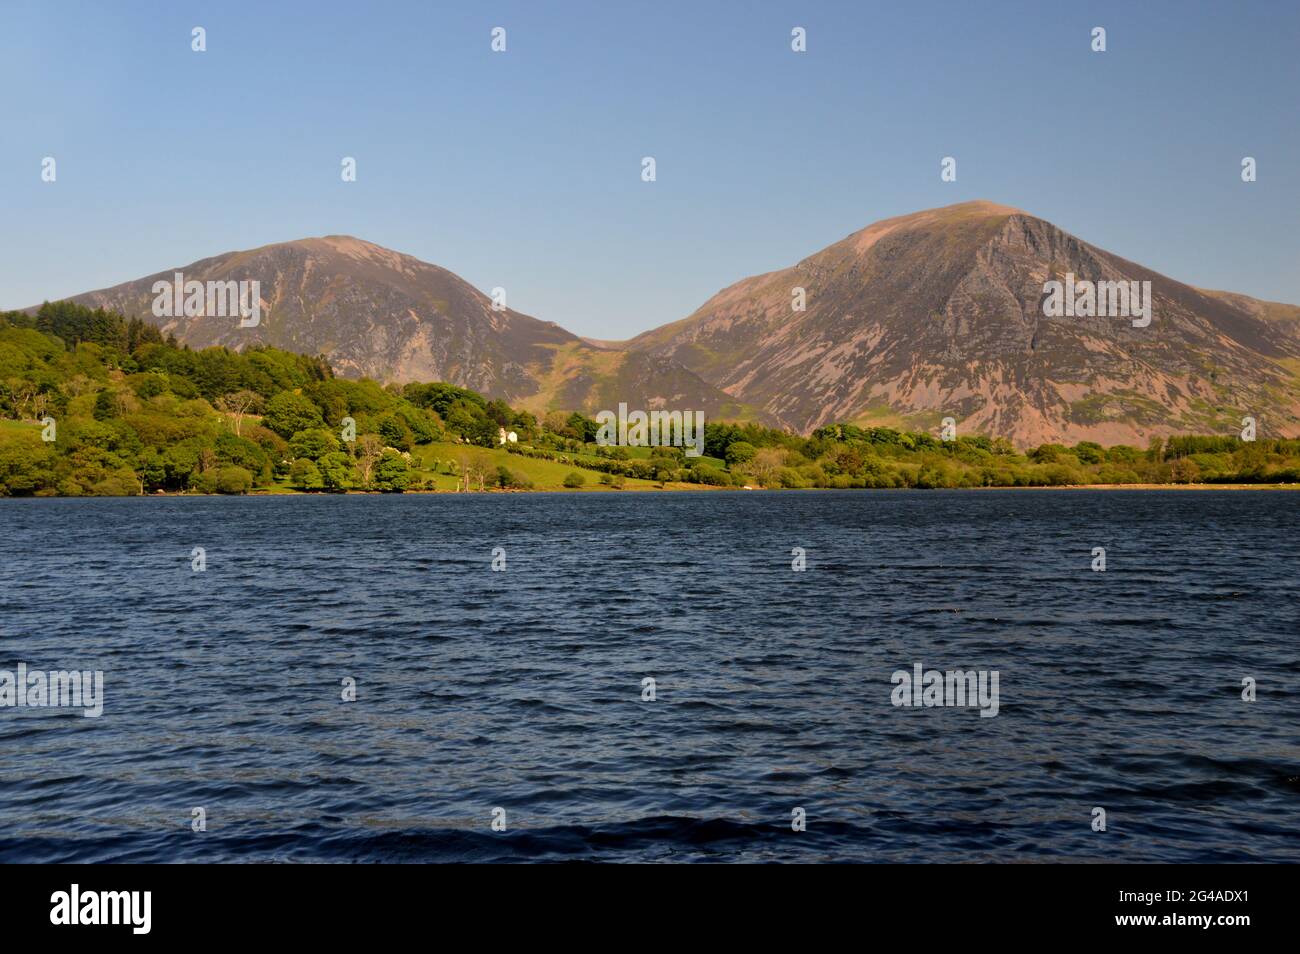 The Wainwrights Whiteside & Grasmoor avec lac Loweswater depuis Holme Wood dans le parc national Lake District, Cumbria, Angleterre, Royaume-Uni. Banque D'Images